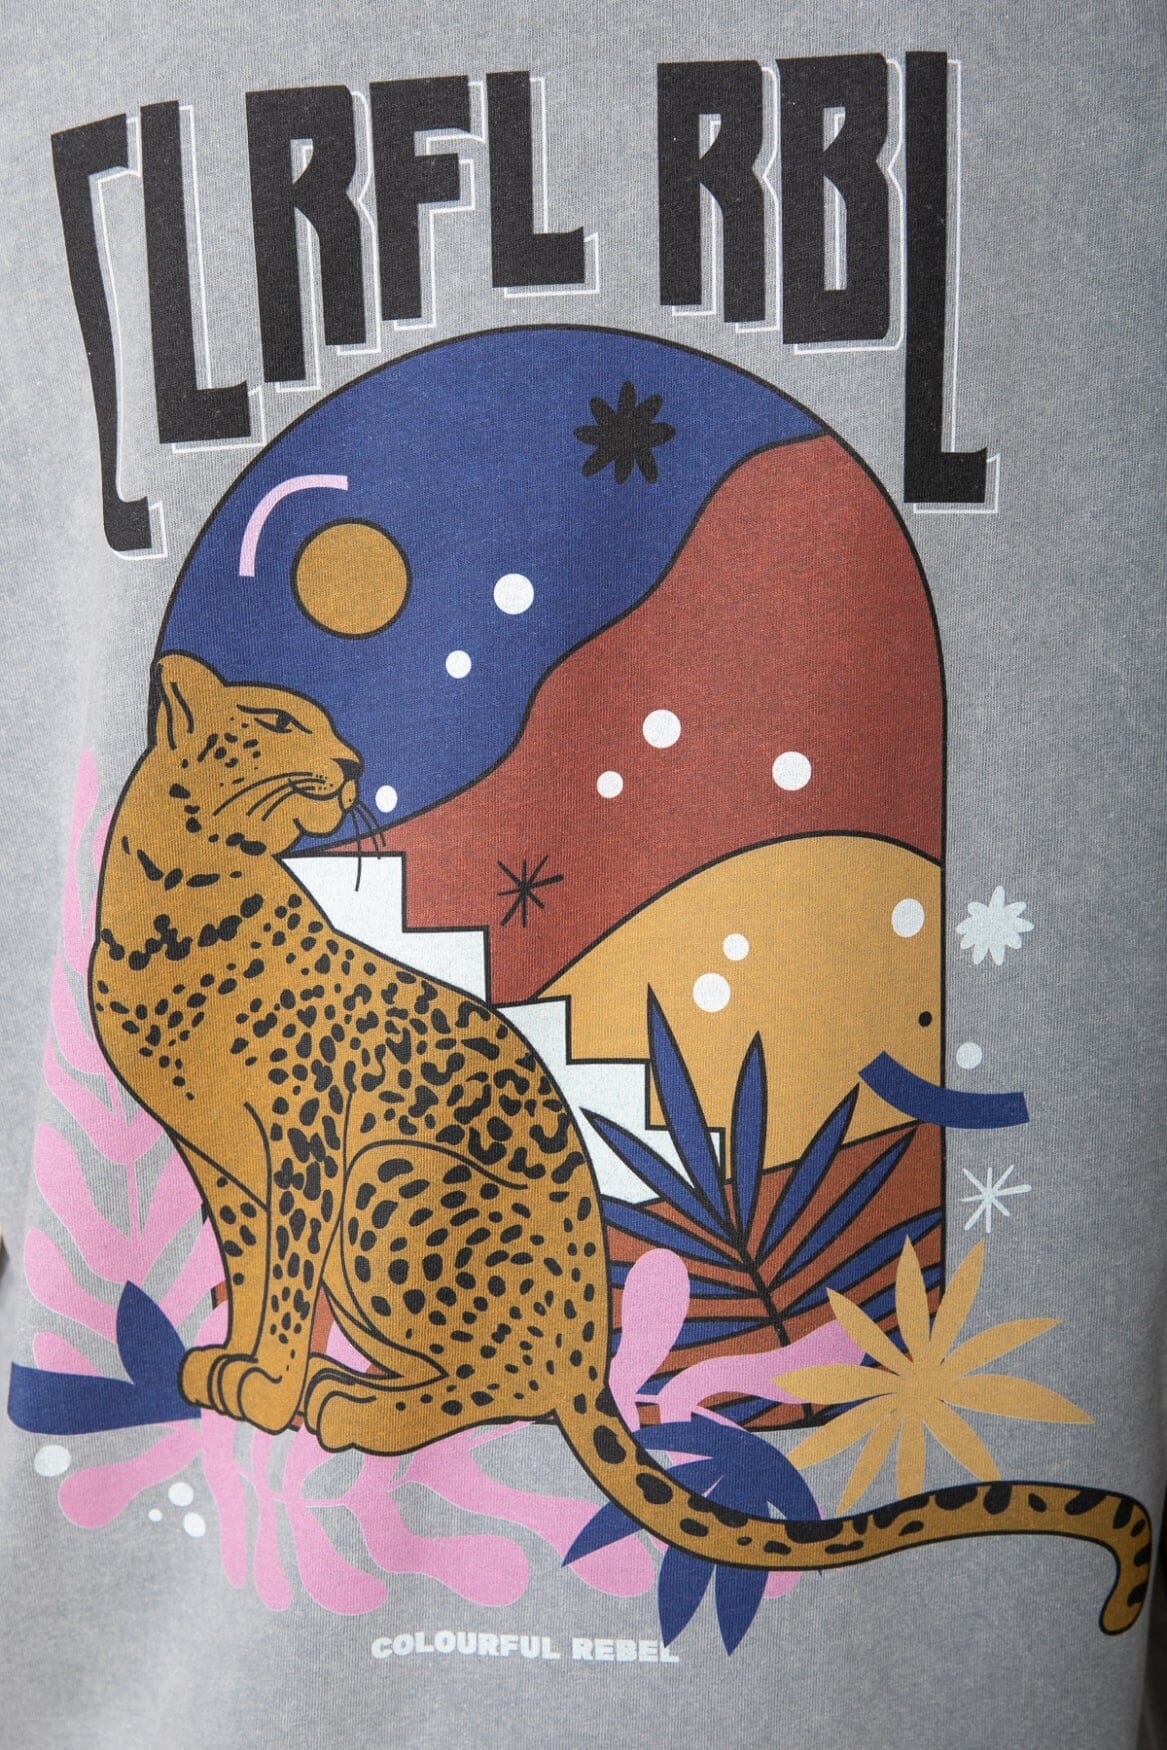 Colourful Rebel Panther Tee | Light grey